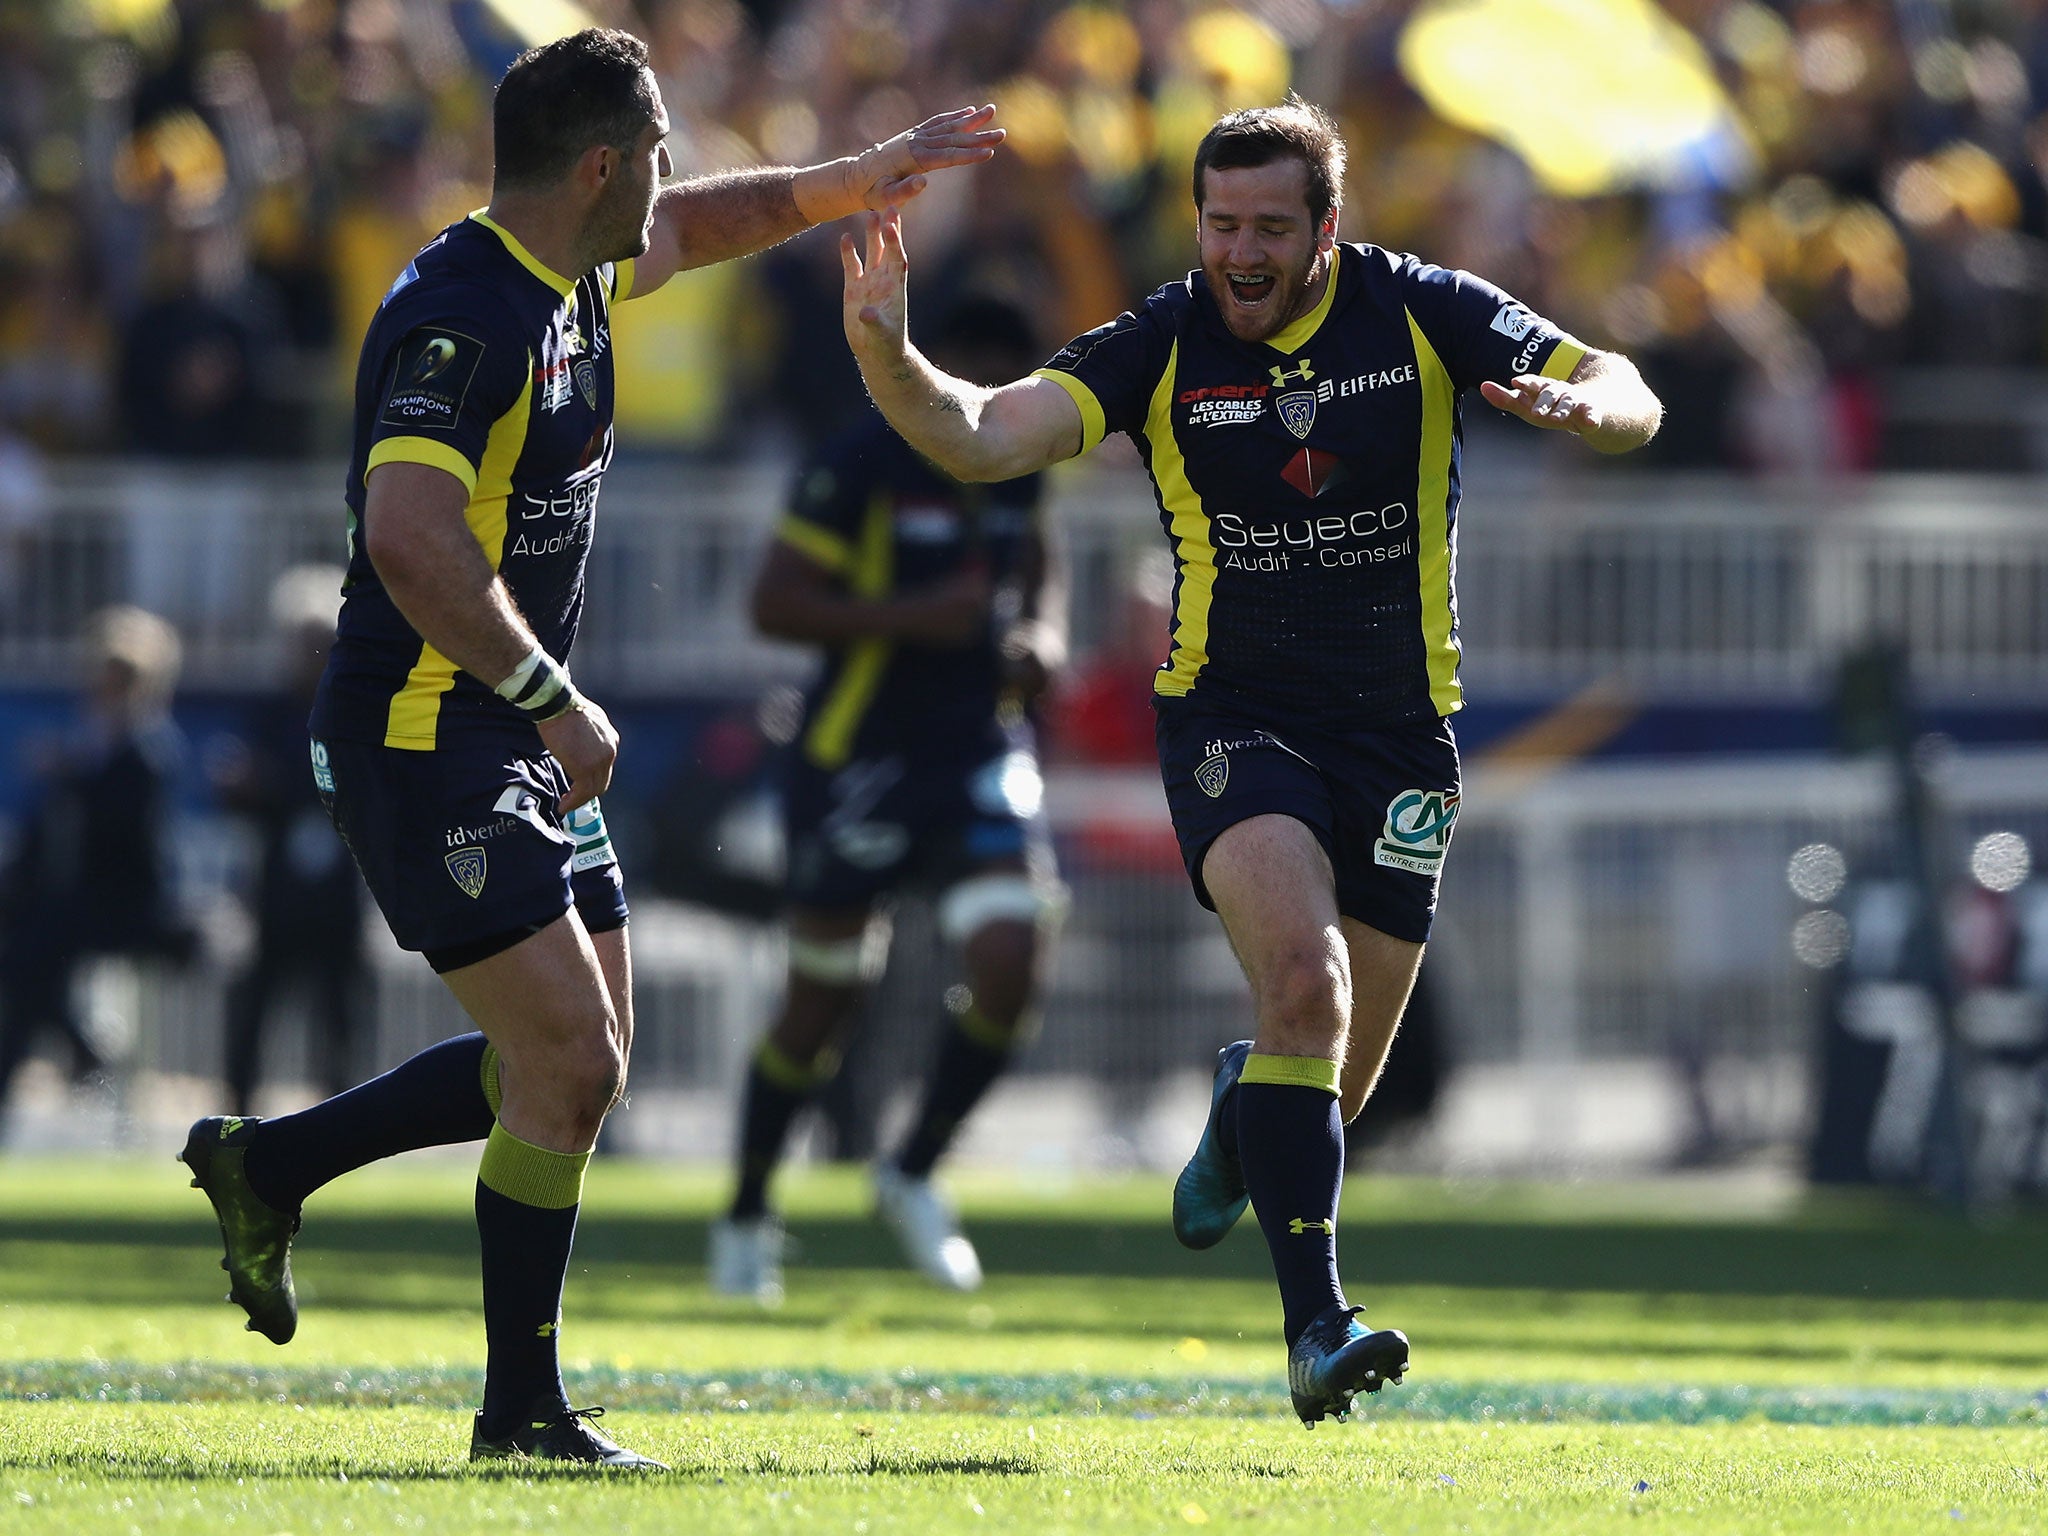 Dallaglio would not begrudge a Clermont victory given what they have been through in recent years